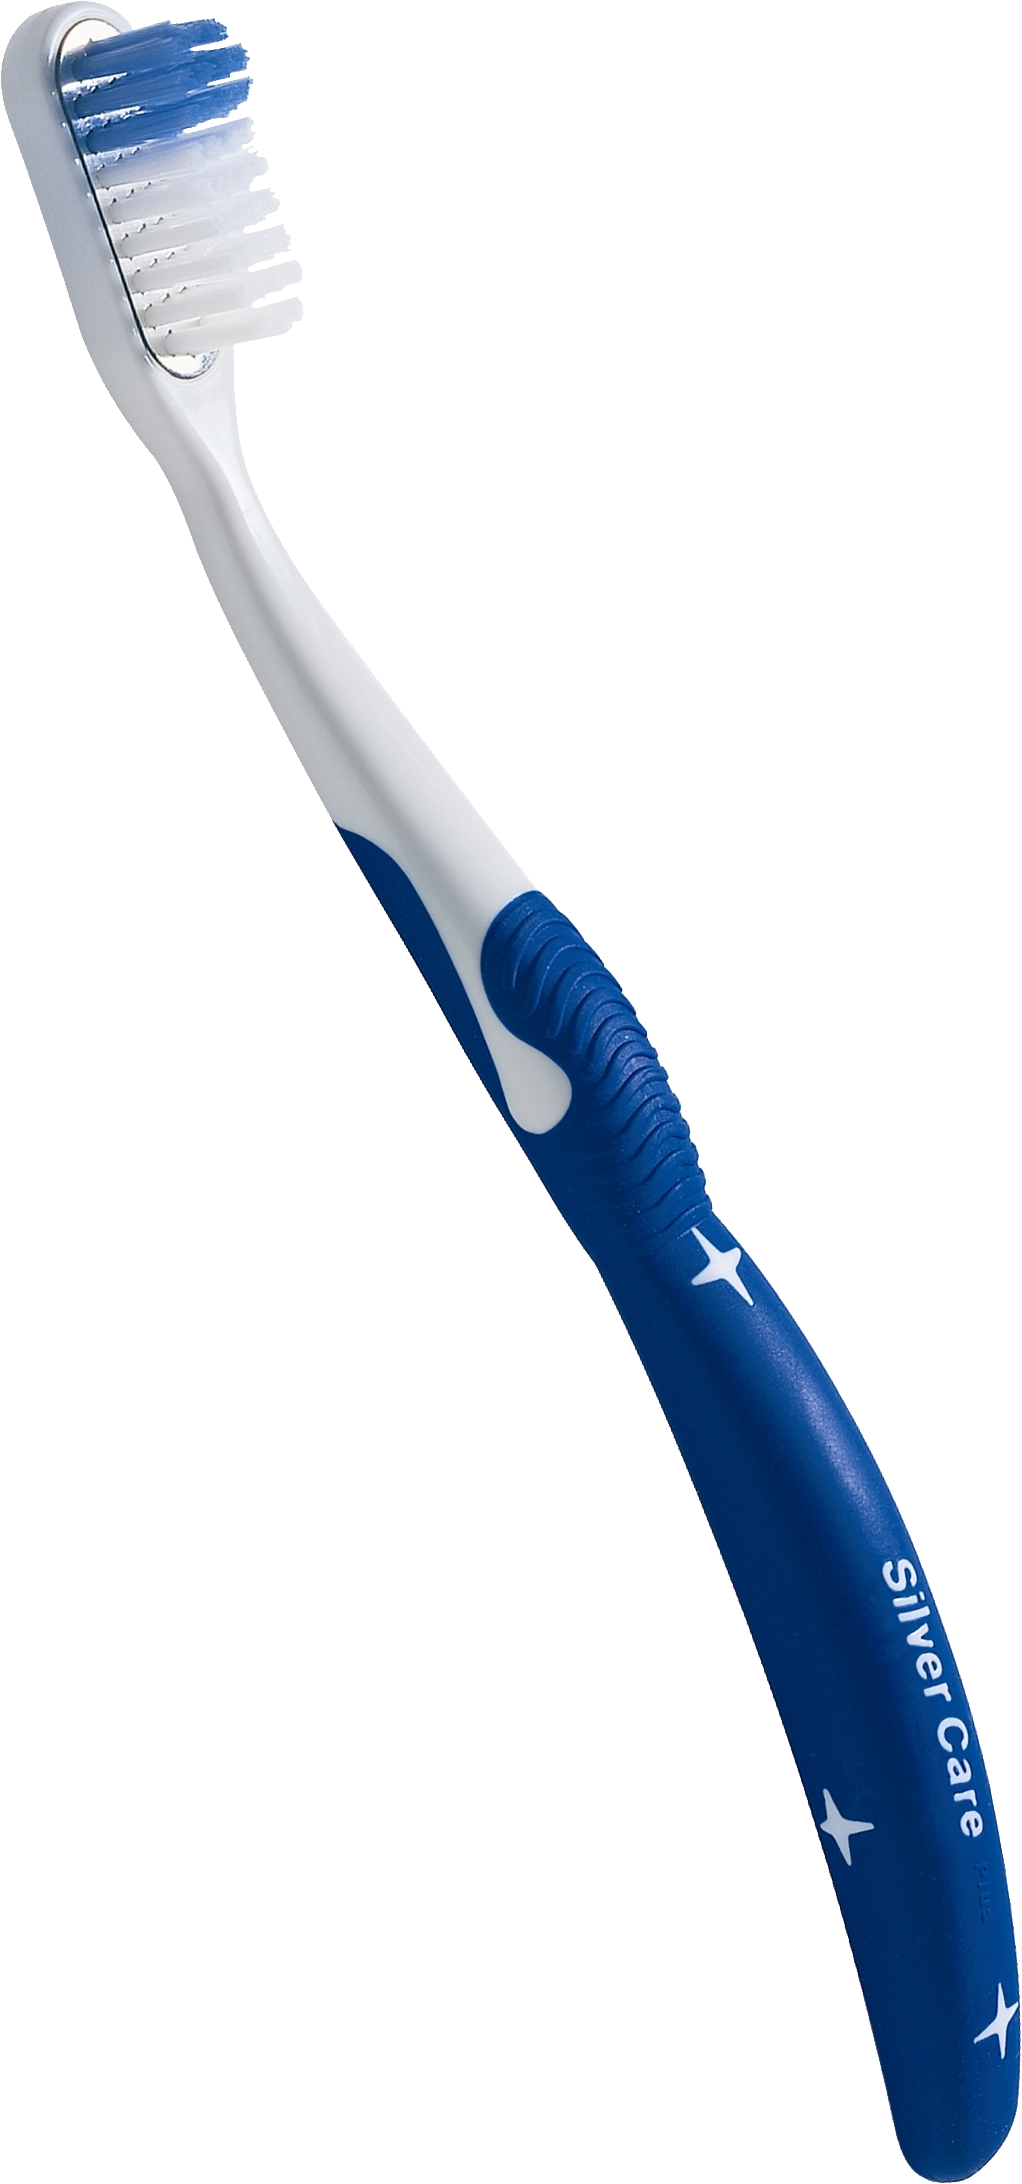 This high quality free PNG image without any background is about toothbrush, blue, white